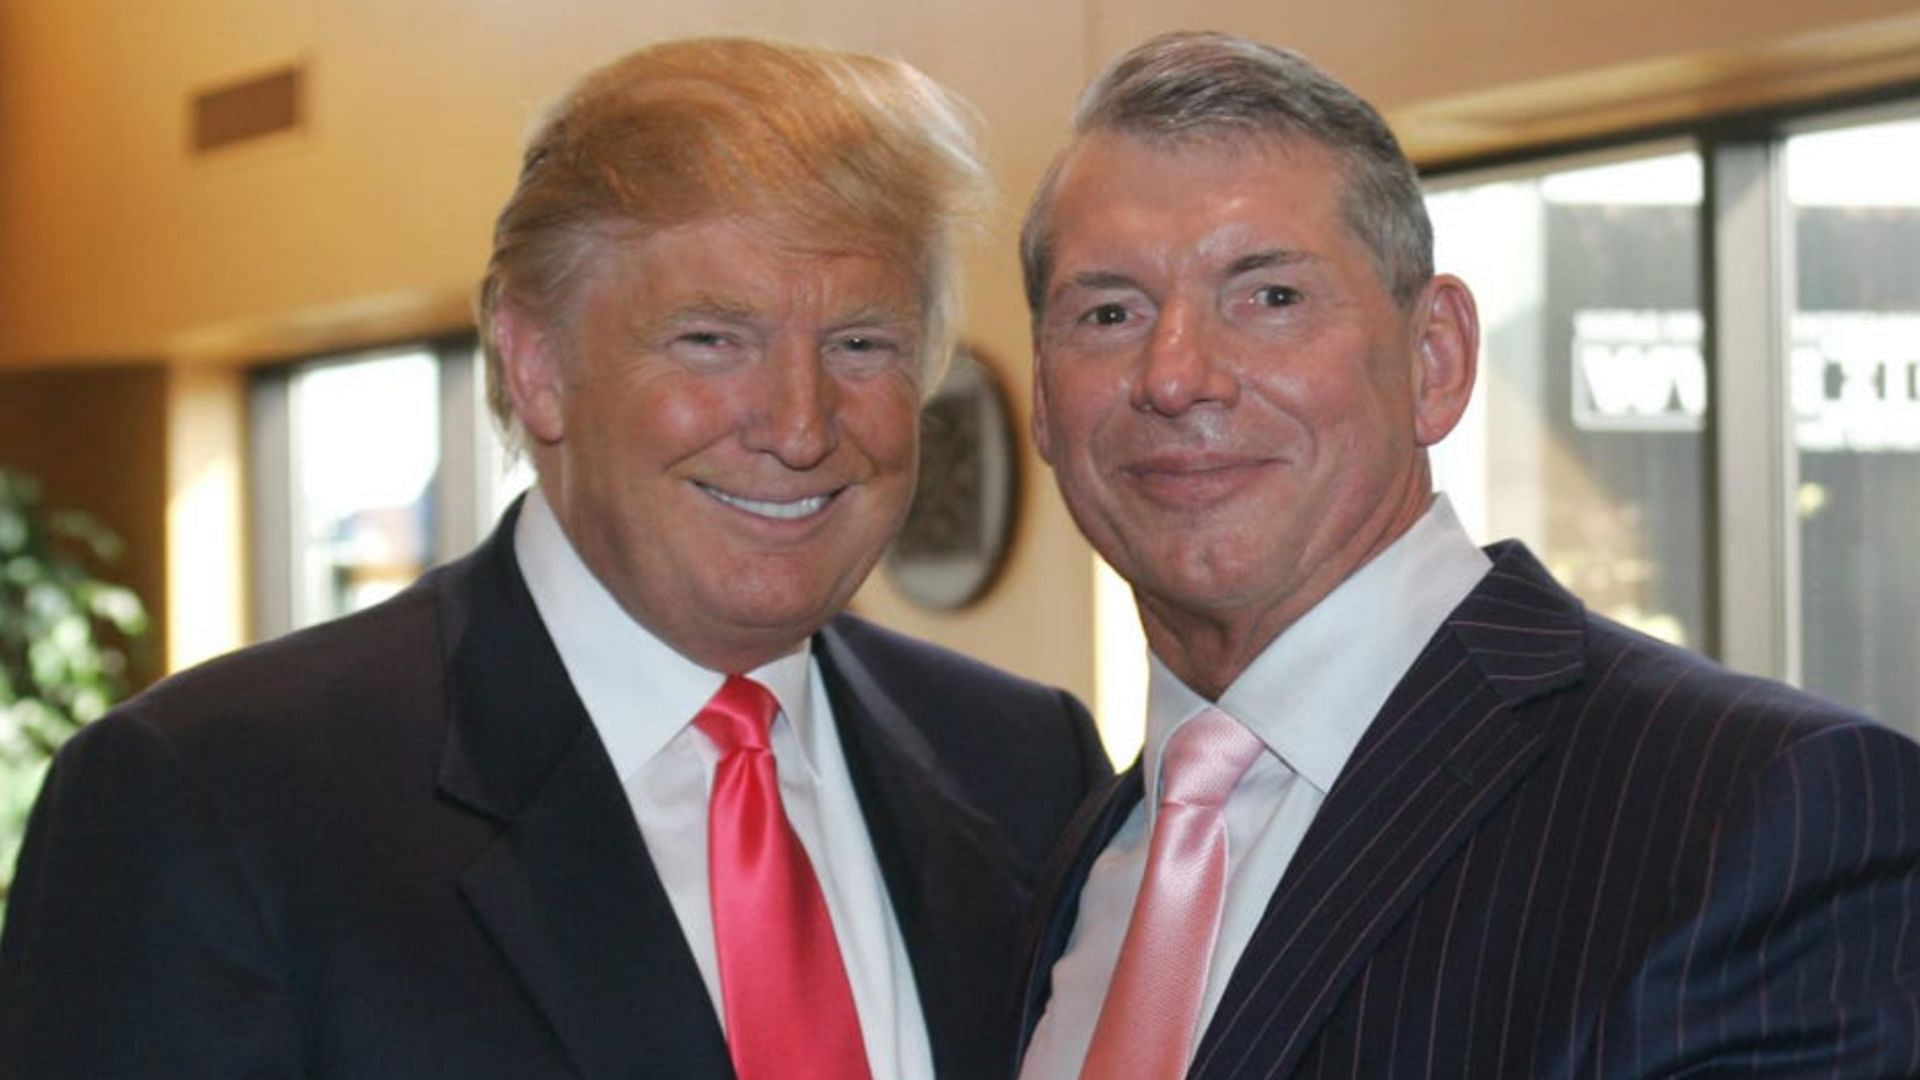 Former WWE CEO Vince McMahon with former US President Donald Trump